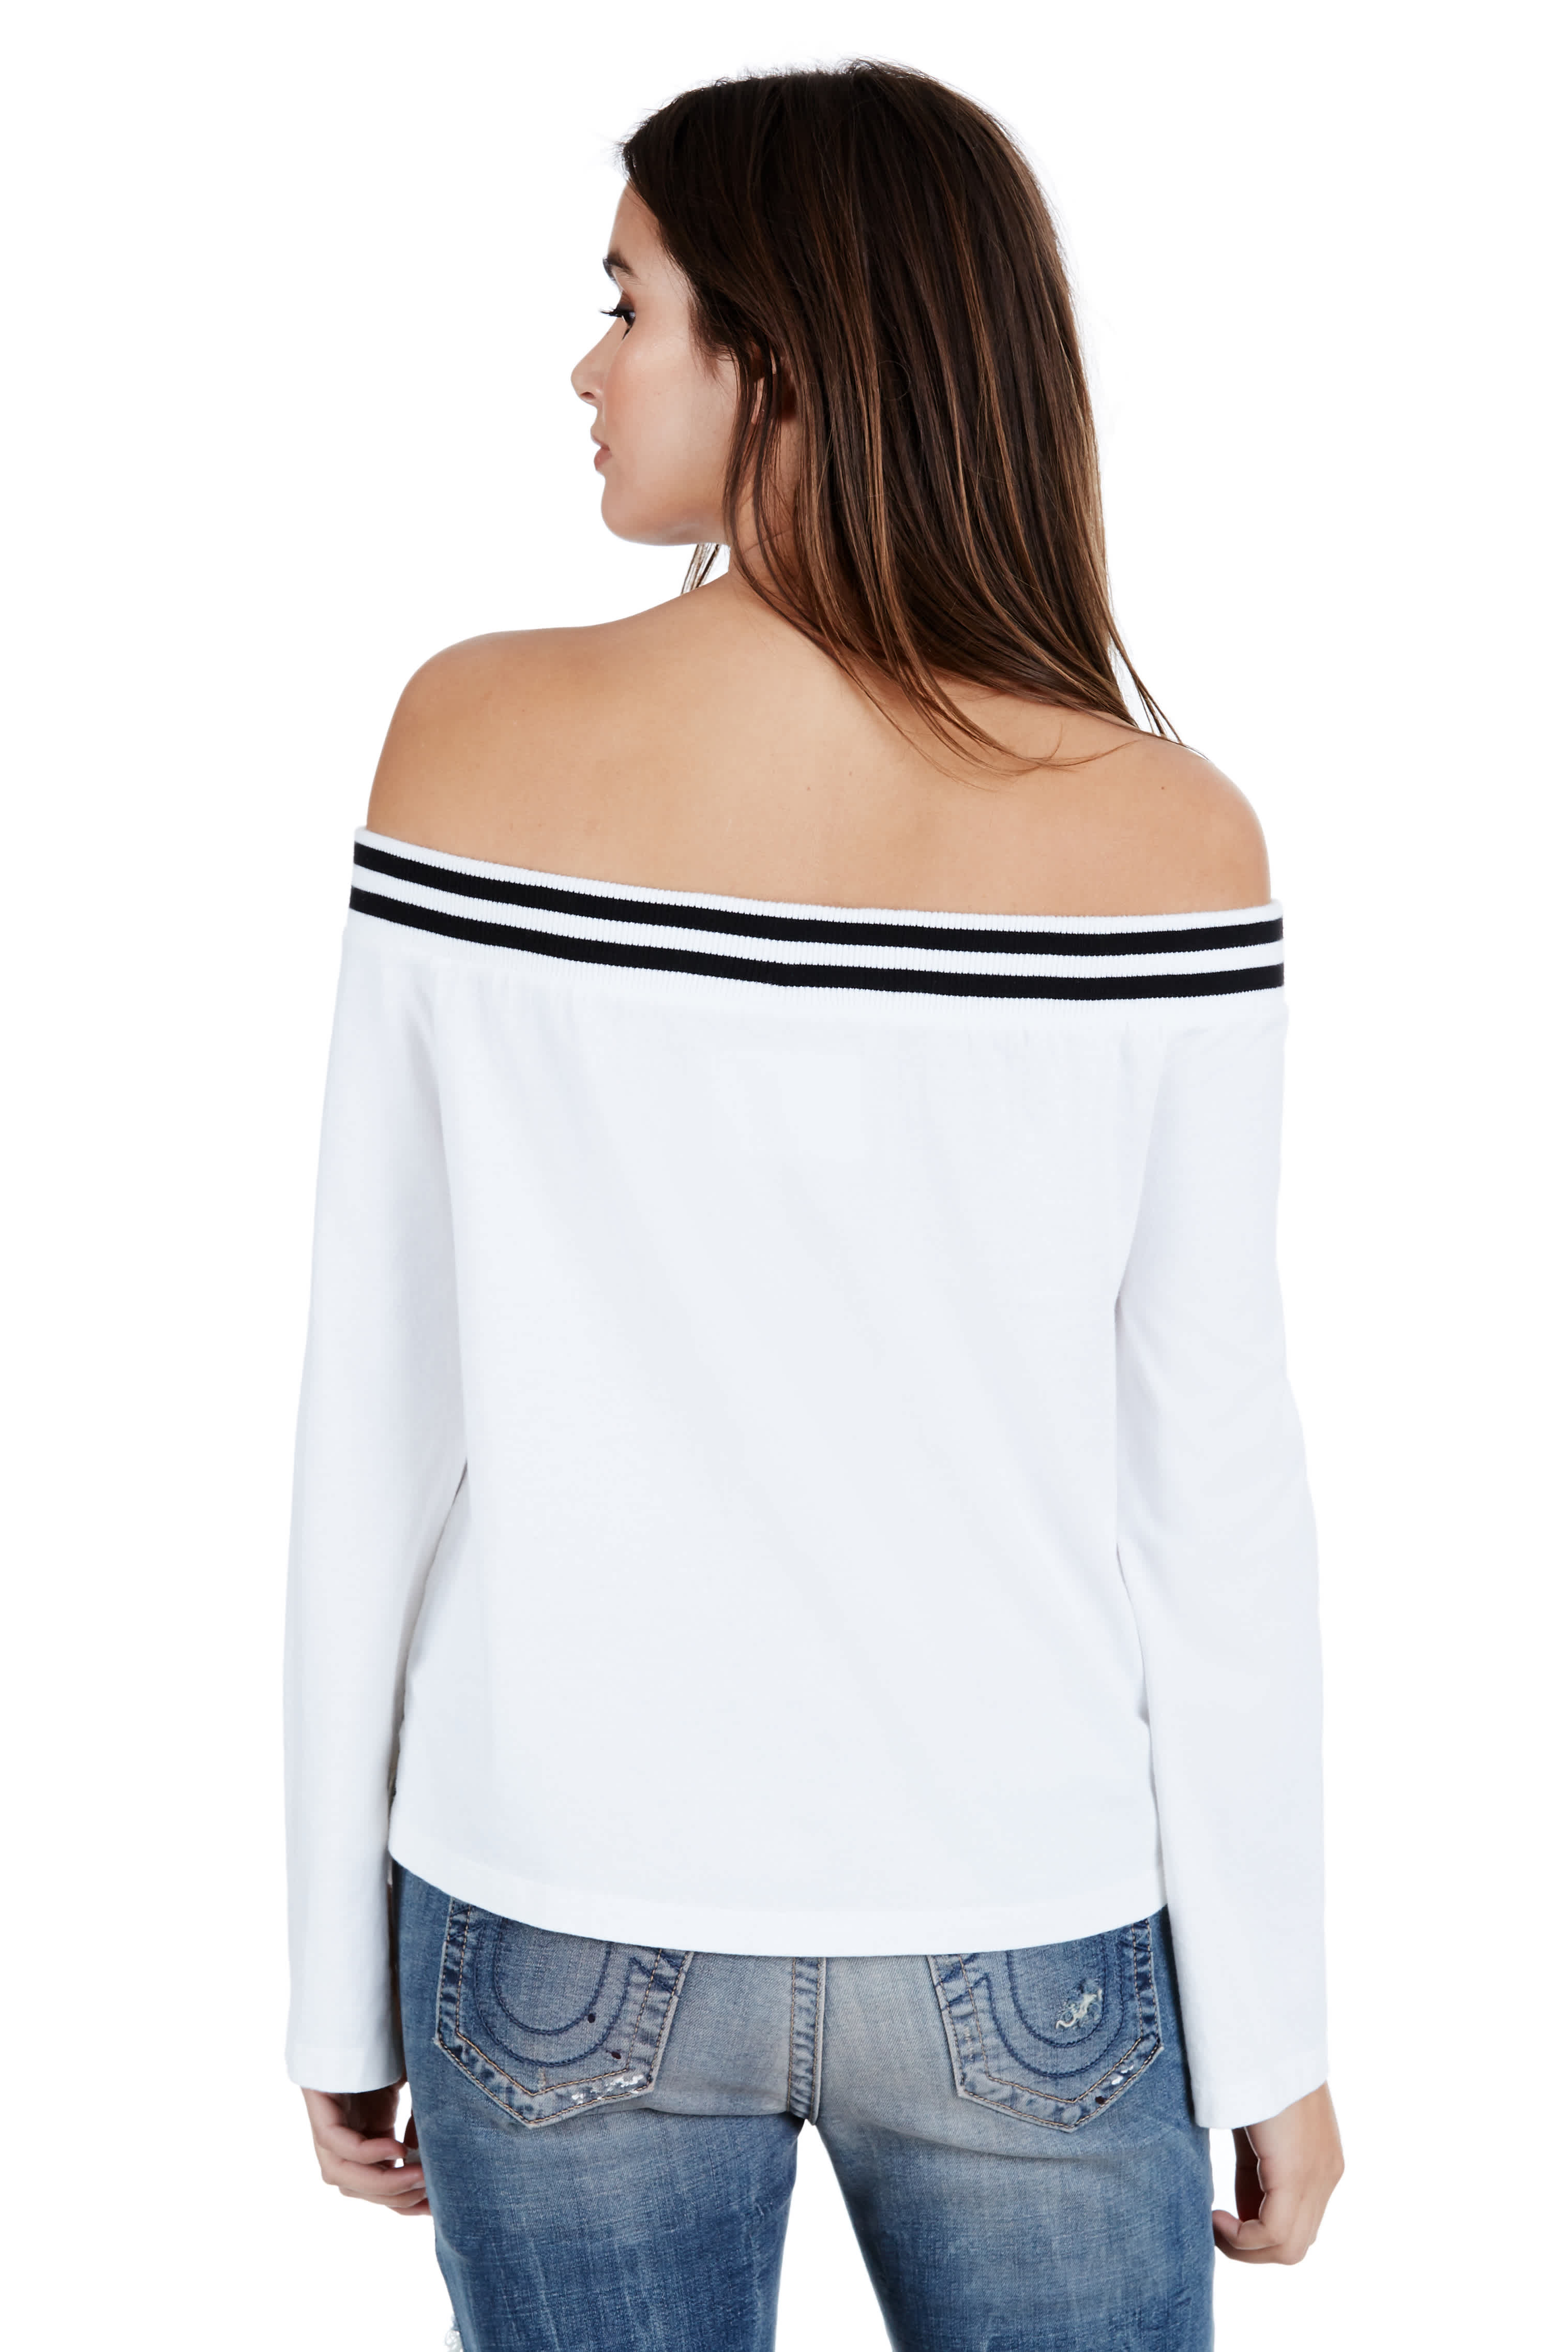 WOMENS EMBROIDERED OFF SHOULDER TOP